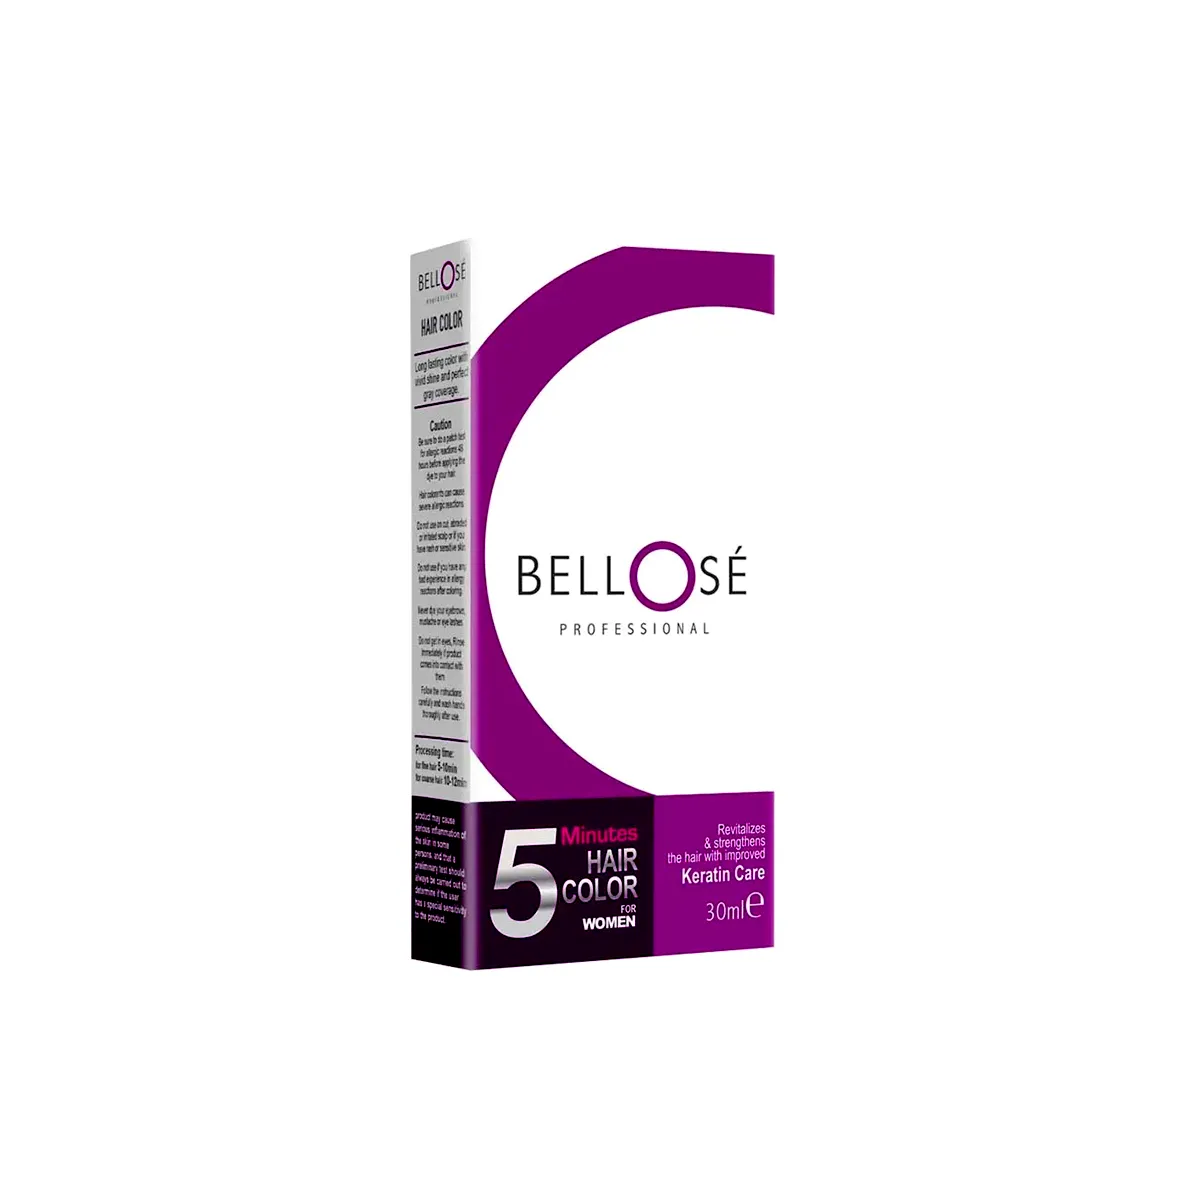 Bellose 5 Mins Hair Color For Women 2.0 30ml